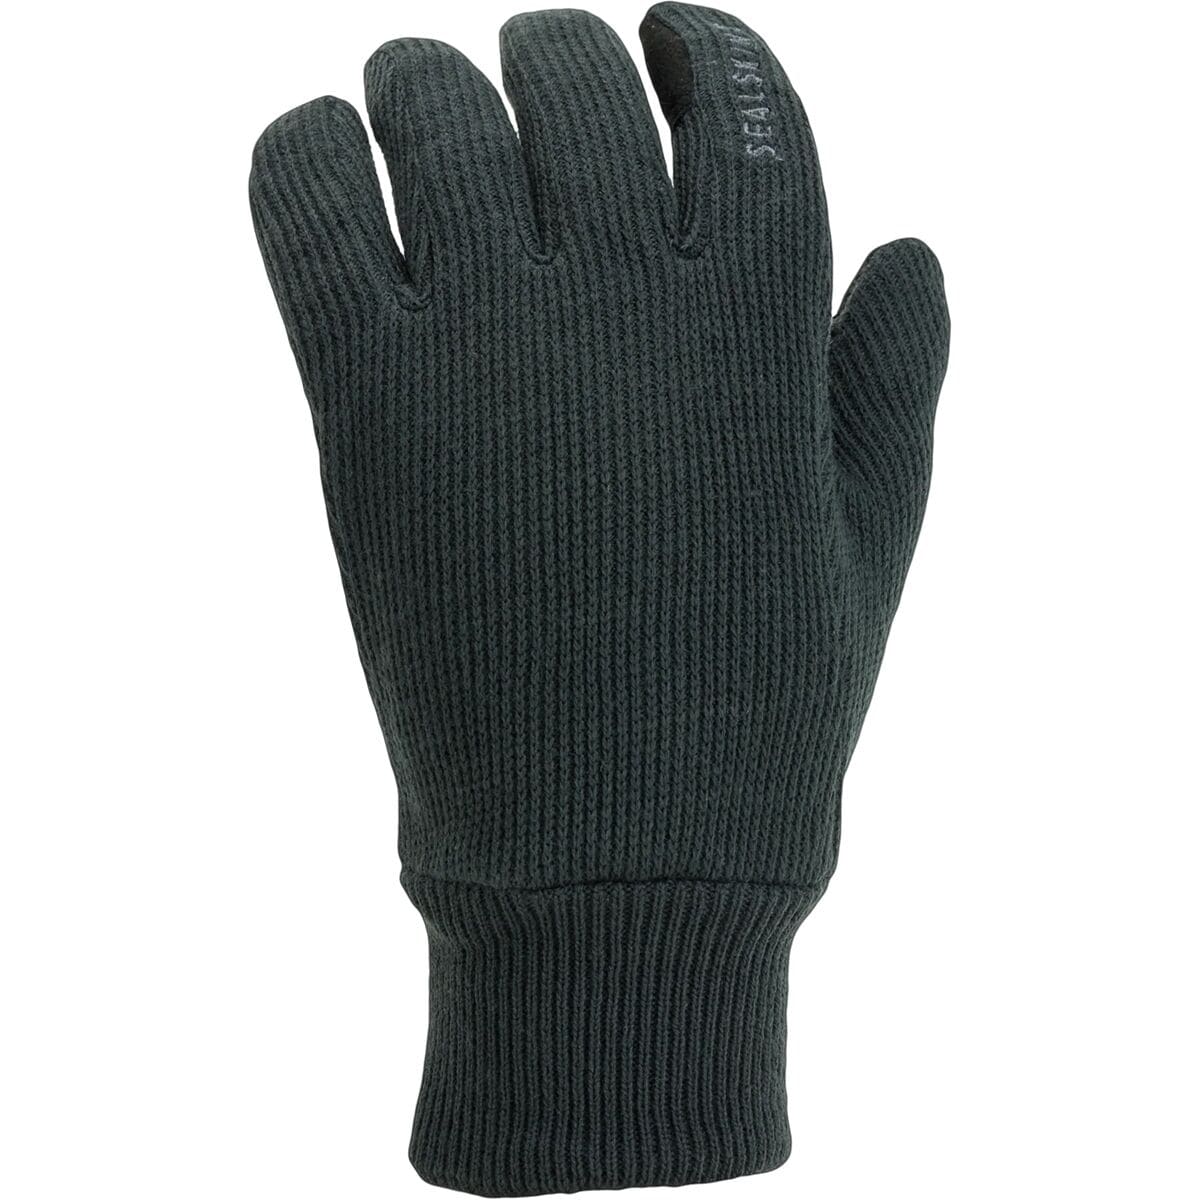 SealSkinz Windproof All Weather Knitted Glove Grey